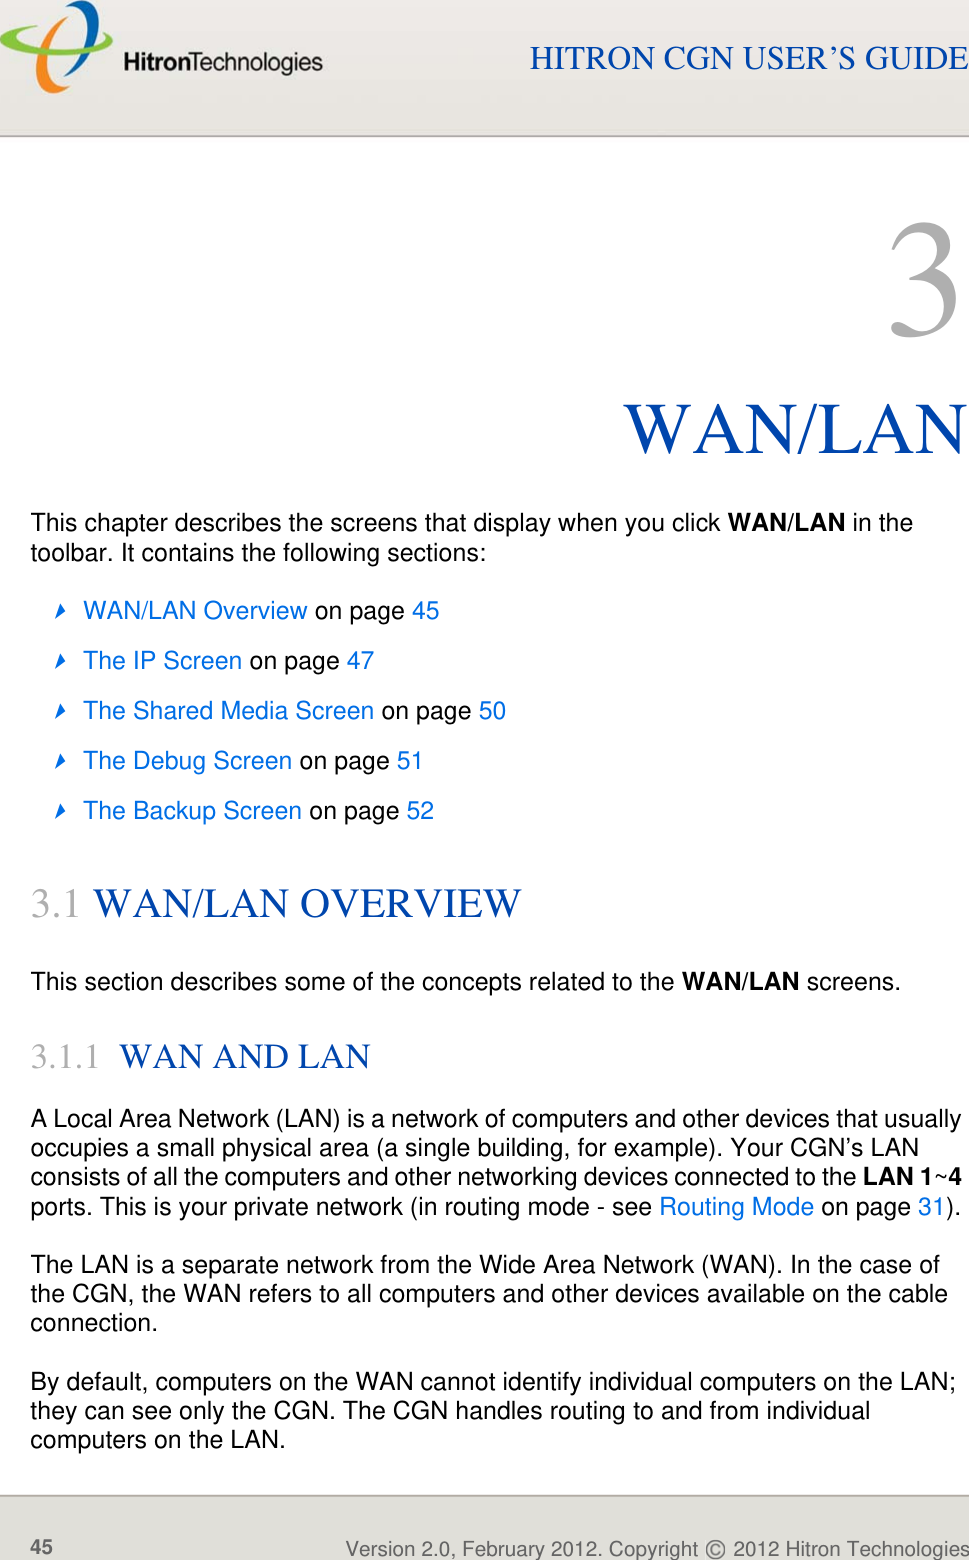 WAN/LANVersion 2.0, February 2012. Copyright   2012 Hitron Technologies45HITRON CGN USER’S GUIDE3WAN/LANThis chapter describes the screens that display when you click WAN/LAN in the toolbar. It contains the following sections:WAN/LAN Overview on page 45The IP Screen on page 47The Shared Media Screen on page 50The Debug Screen on page 51The Backup Screen on page 523.1 WAN/LAN OVERVIEWThis section describes some of the concepts related to the WAN/LAN screens.3.1.1  WAN AND LANA Local Area Network (LAN) is a network of computers and other devices that usually occupies a small physical area (a single building, for example). Your CGN’s LAN consists of all the computers and other networking devices connected to the LAN 1~4 ports. This is your private network (in routing mode - see Routing Mode on page 31). The LAN is a separate network from the Wide Area Network (WAN). In the case of the CGN, the WAN refers to all computers and other devices available on the cable connection.By default, computers on the WAN cannot identify individual computers on the LAN; they can see only the CGN. The CGN handles routing to and from individual computers on the LAN.